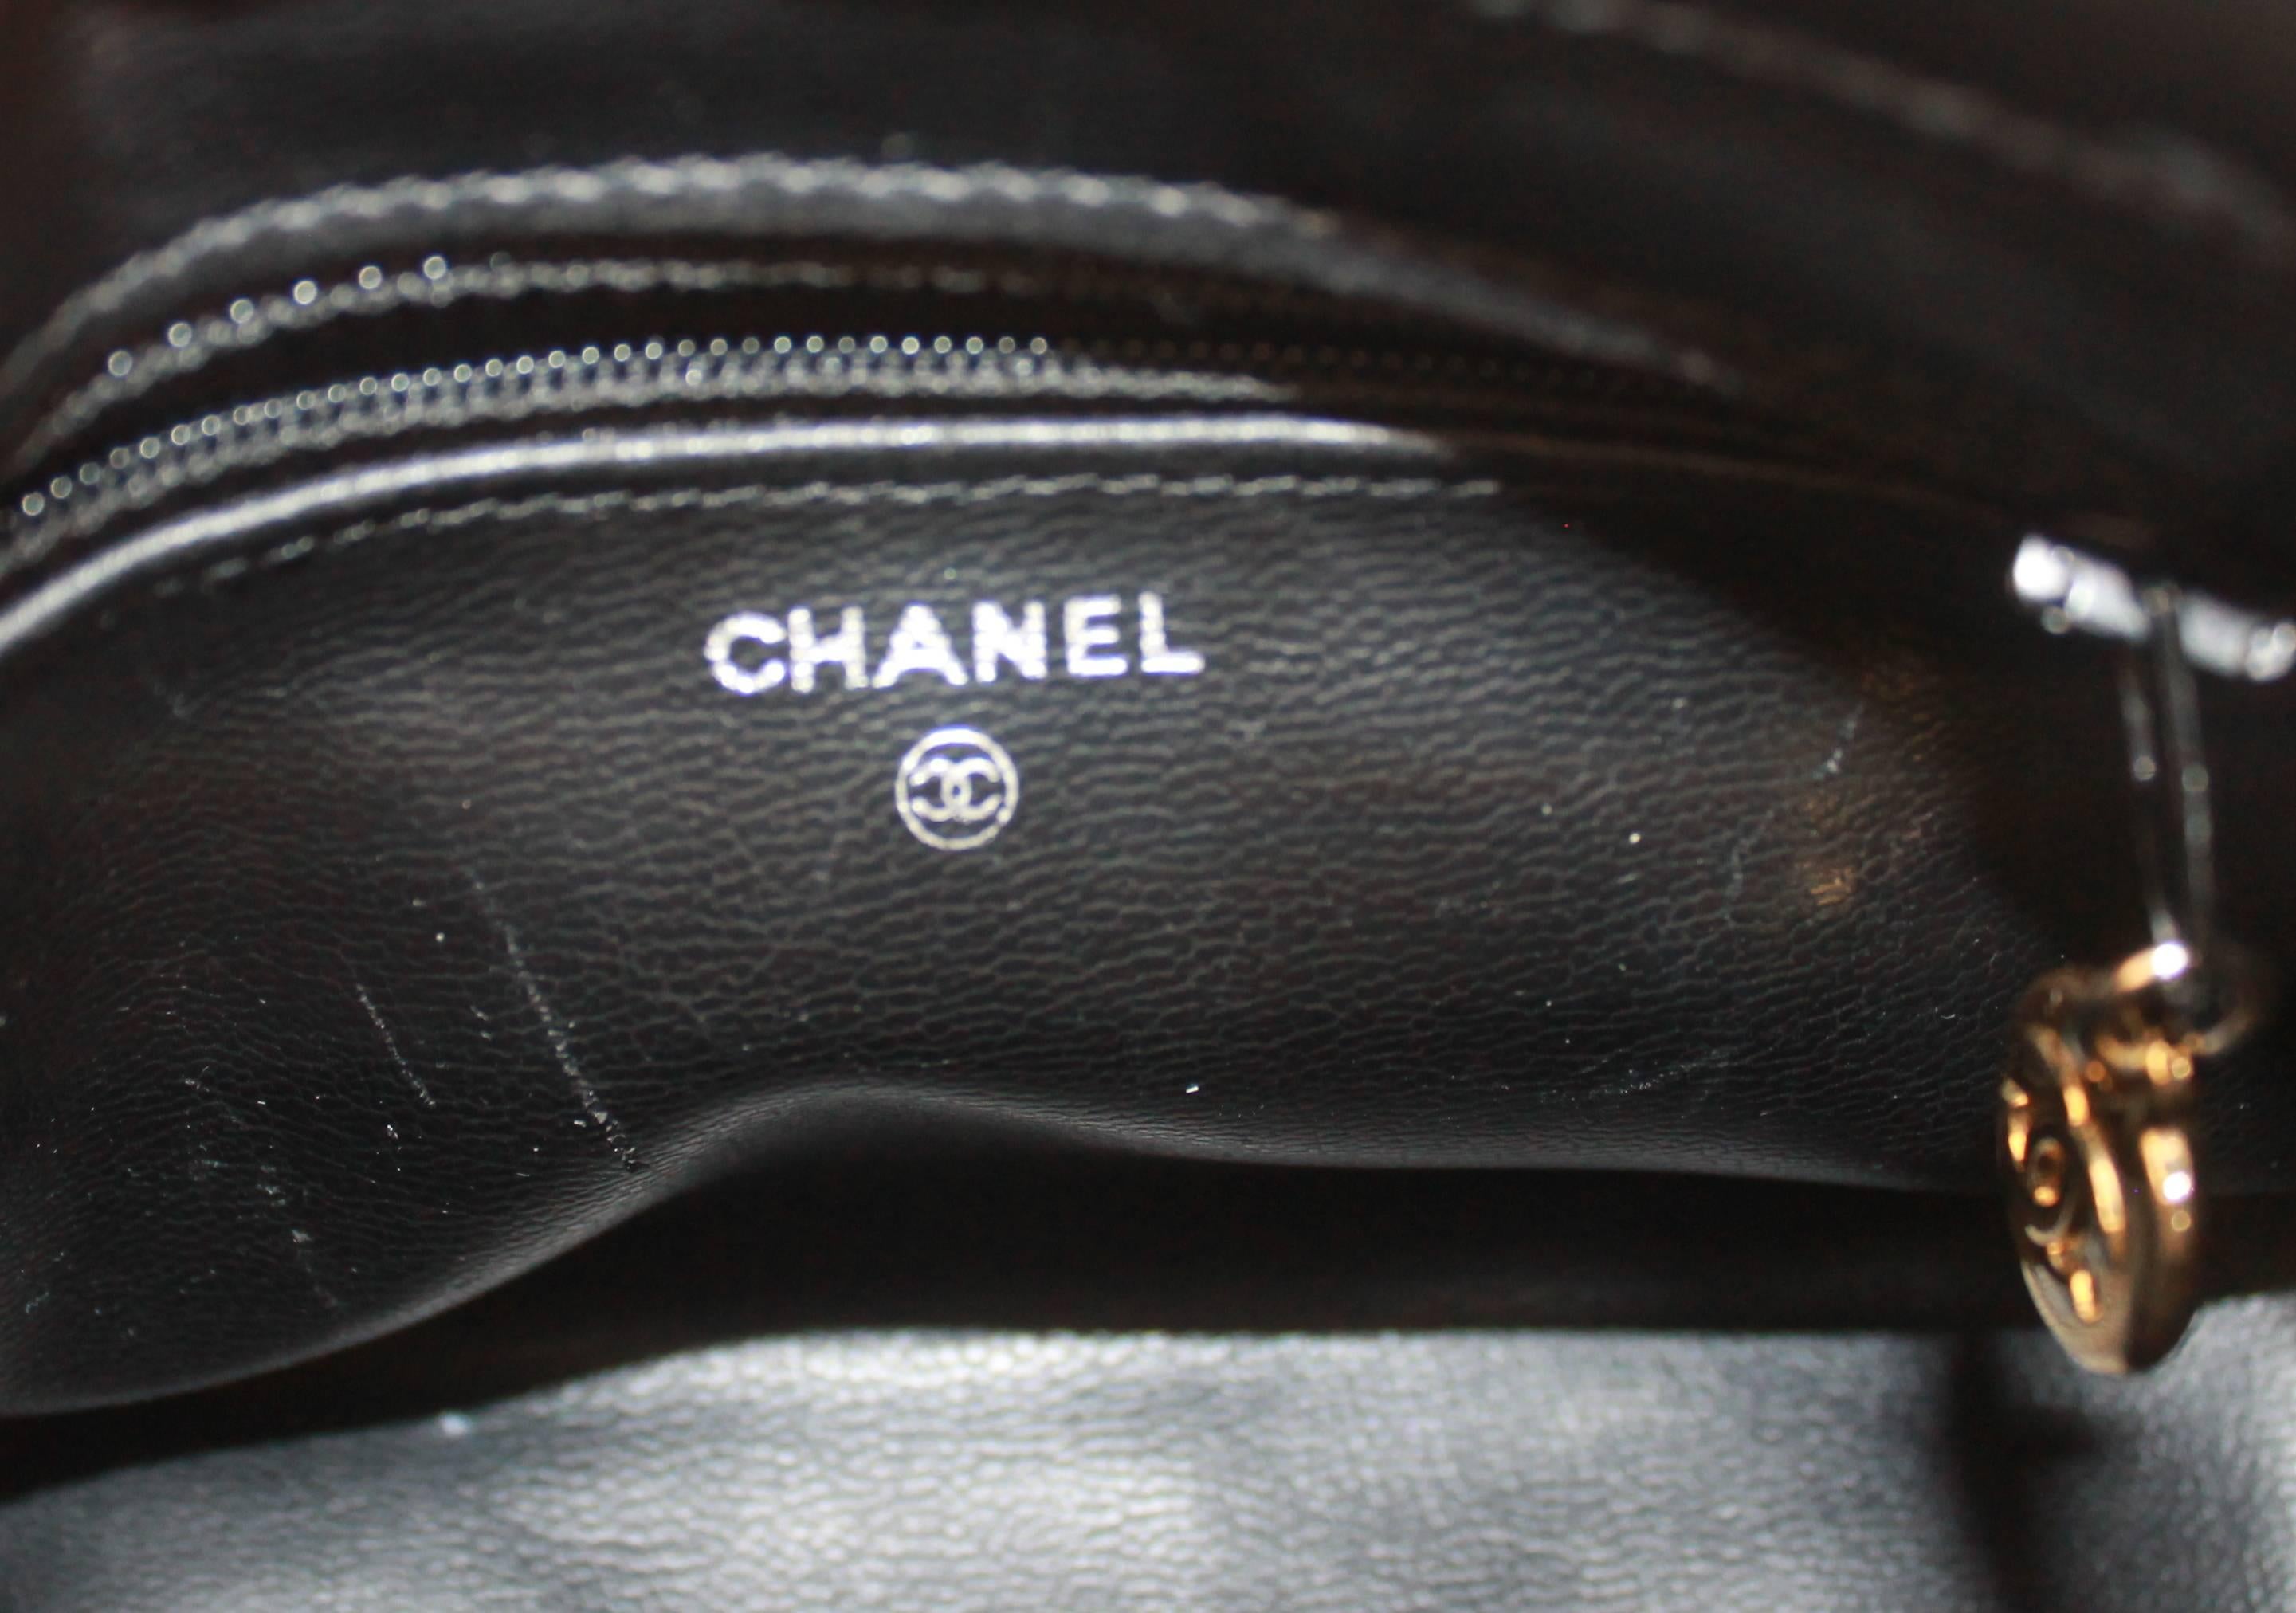 Chanel Black Patent Leather Makeup Case - GHW - Circa 1997 1